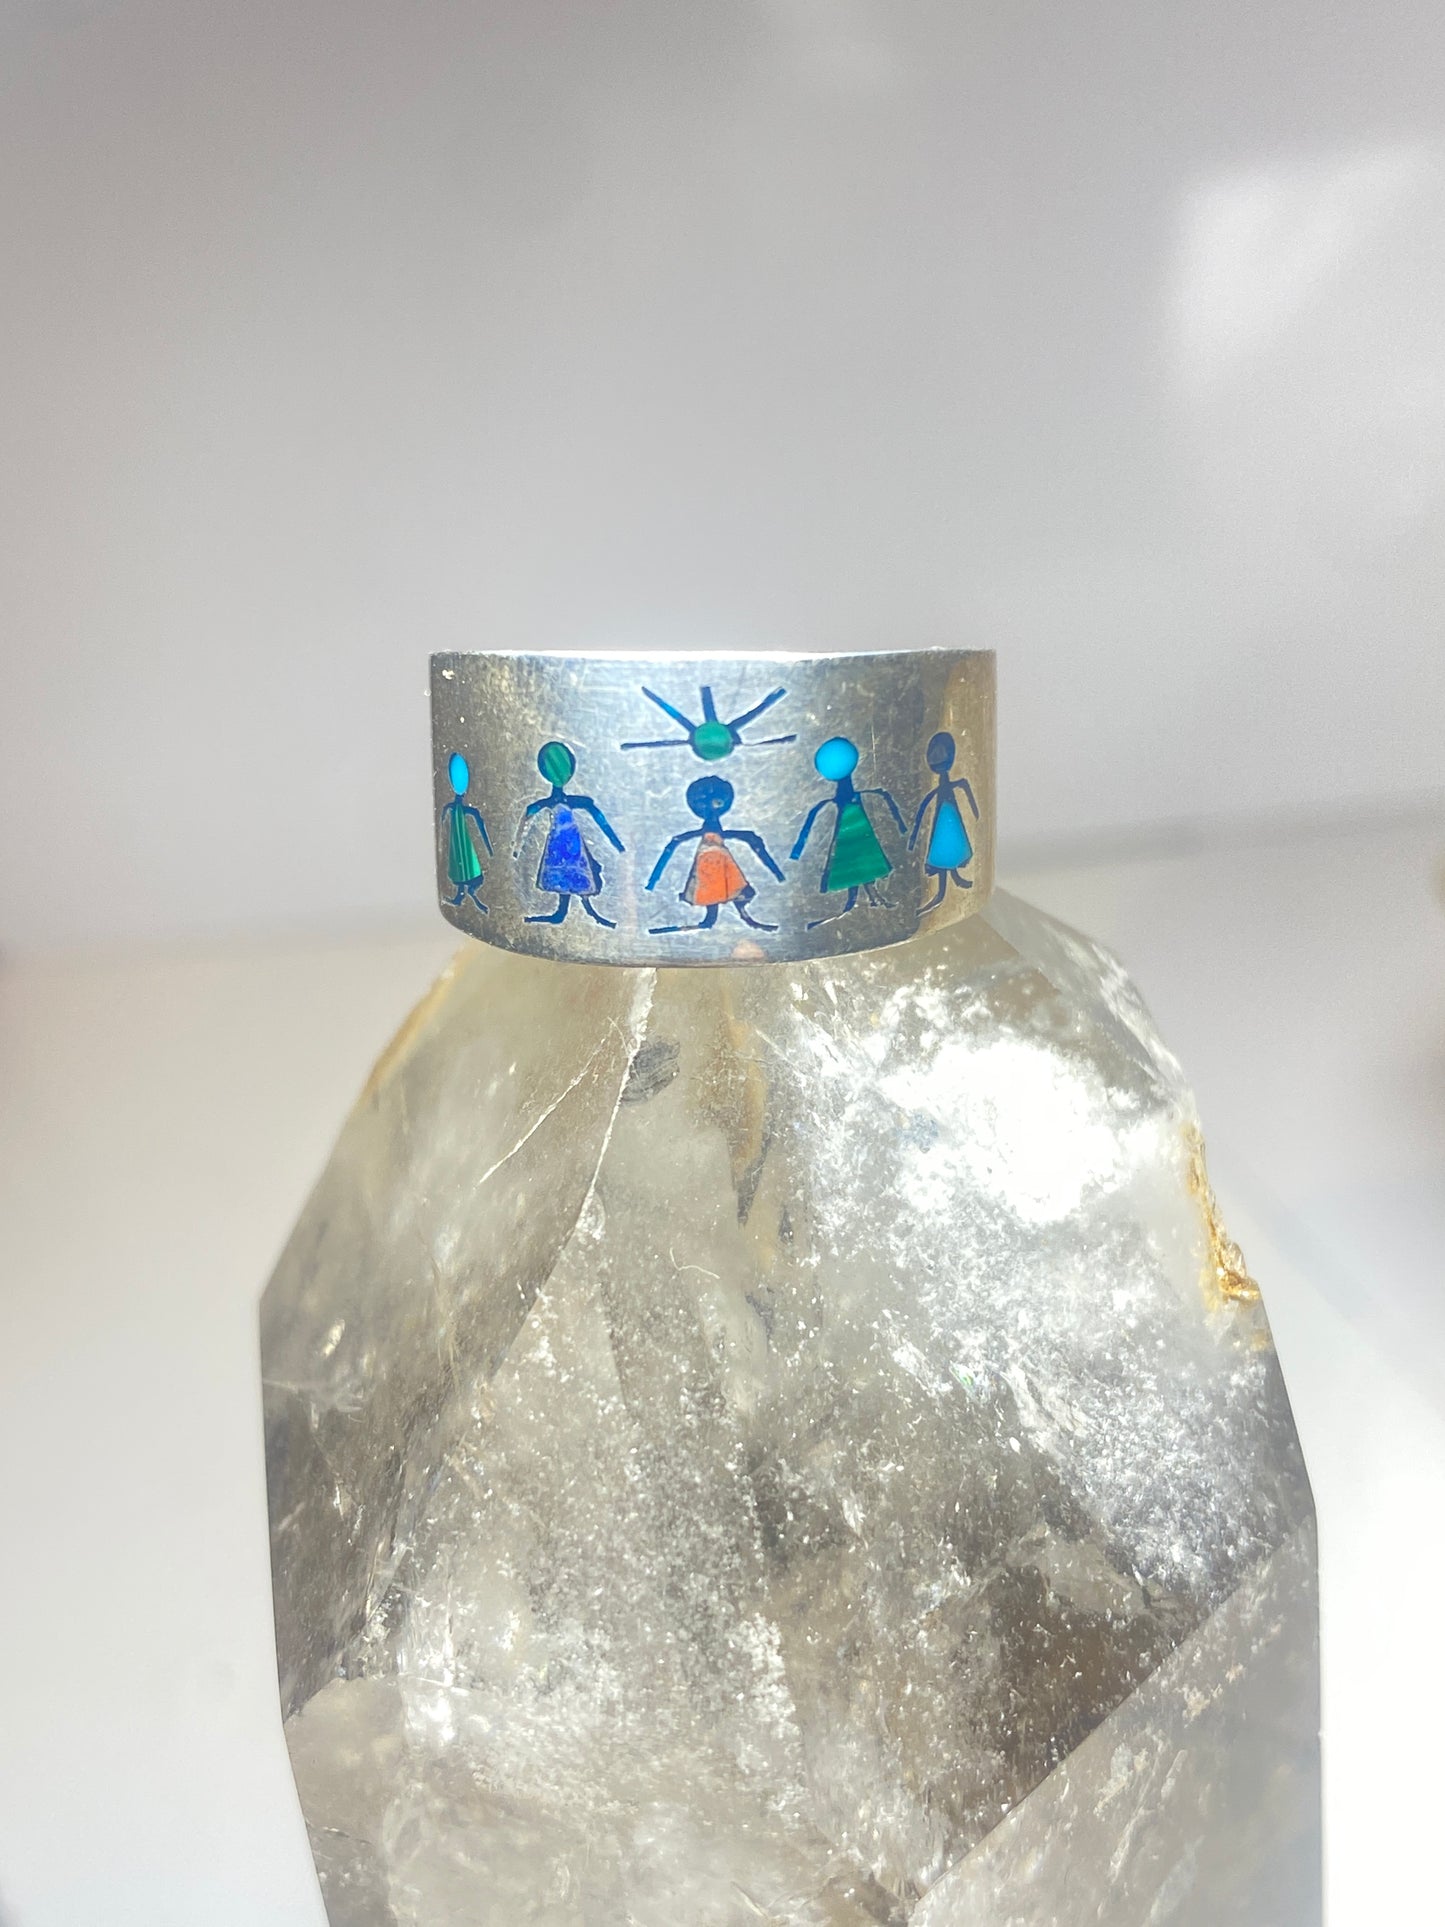 Children ring size 9.25 turquoise blue lapis inlay teachers band sterling silver women